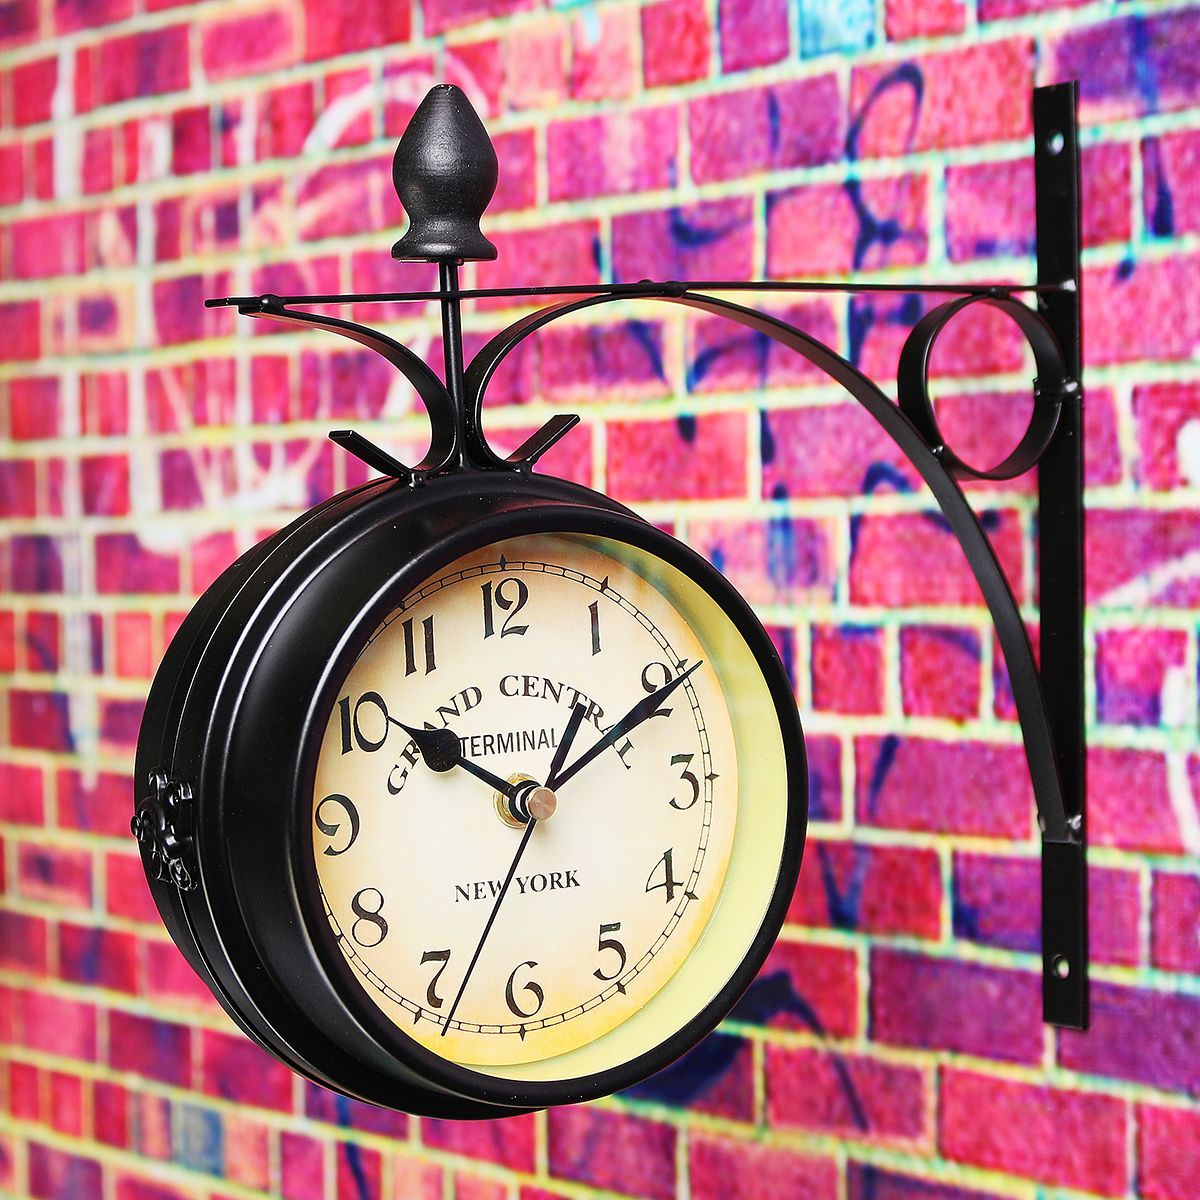 Antique-Double-Sided-Wall-Mount-Station-Clock-Garden-Vintage-Retro-Home-Decoration-1304835